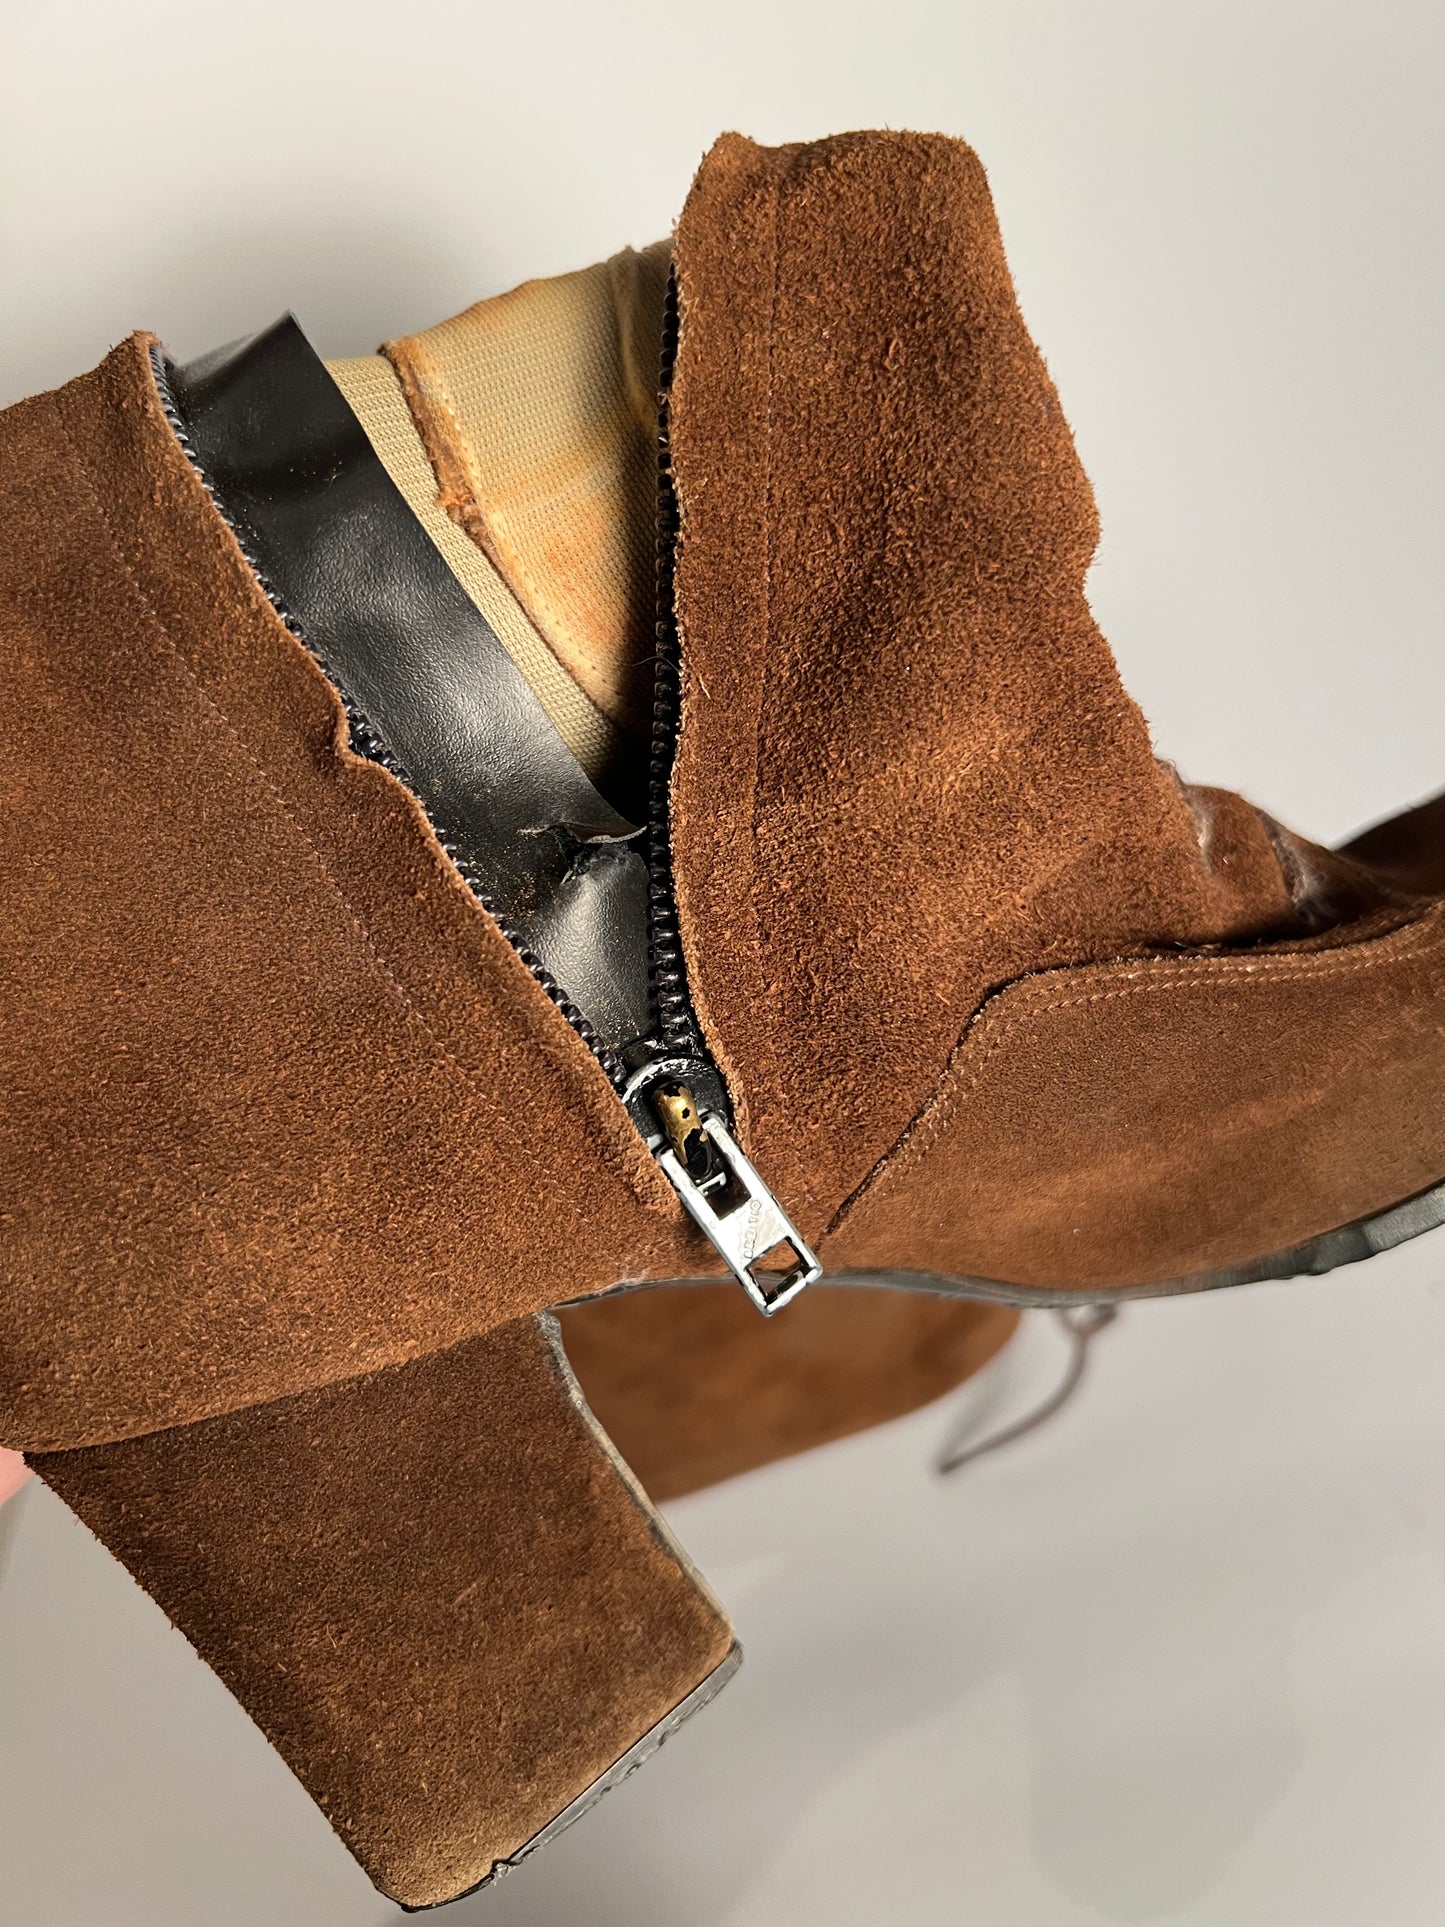 Vintage Brown Suede Lace-Up Go-Go Boots